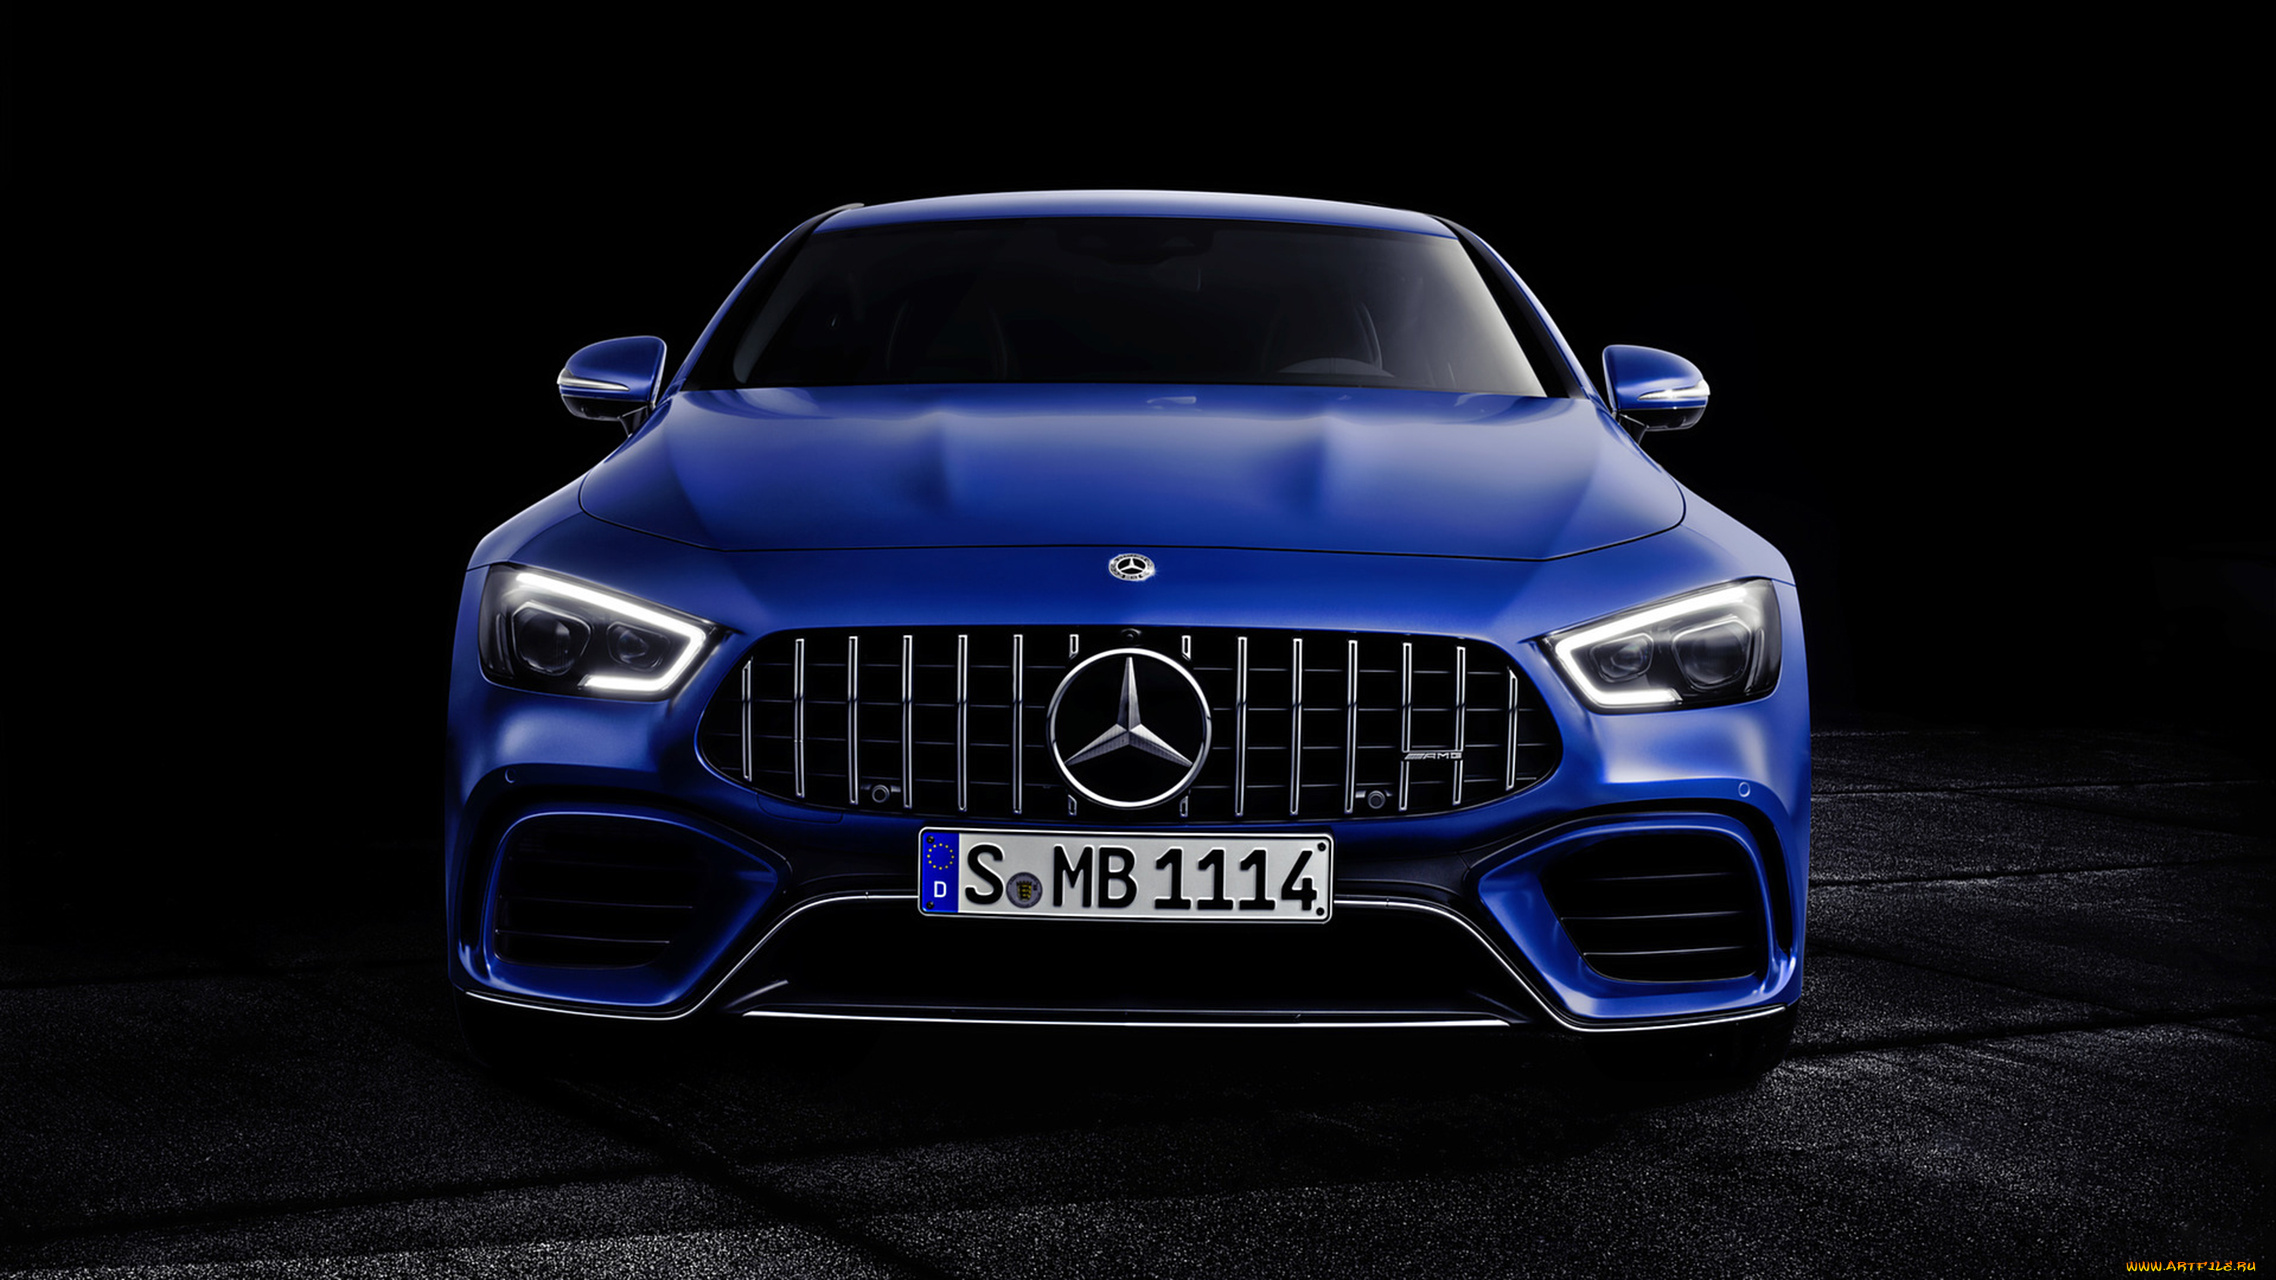 mercedes-benz, amg, gt, 63, s, 4matic, 4door, coupe, 2019, автомобили, mercedes-benz, amg, gt, 63, s, 4matic, 4door, coupe, 2019, blue